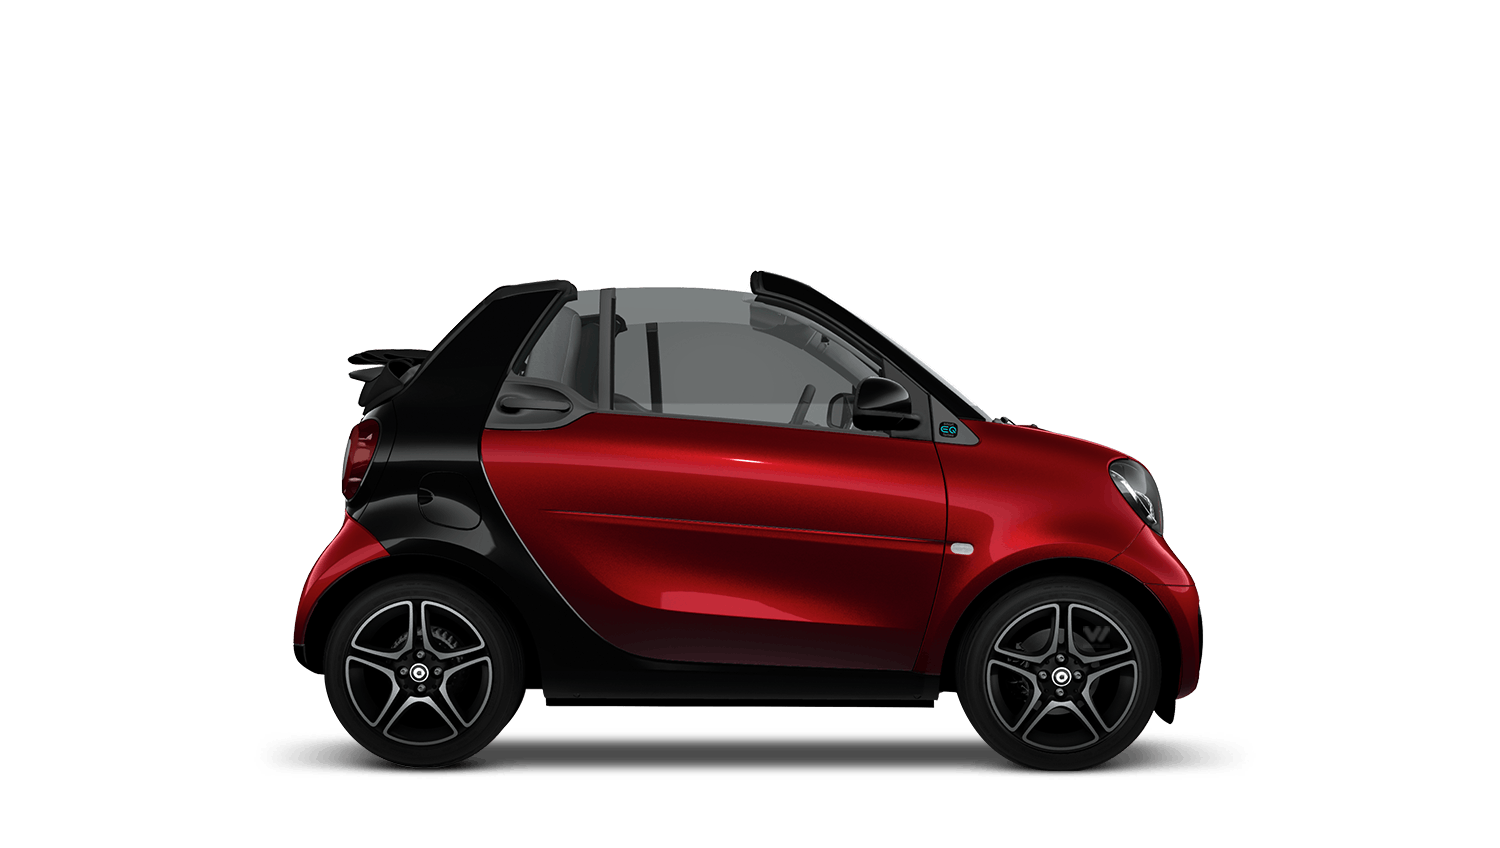 https://web21st.imgix.net/assets/images/new-vehicles/smart/smart-eq-fortwo-cabrio-2020.png